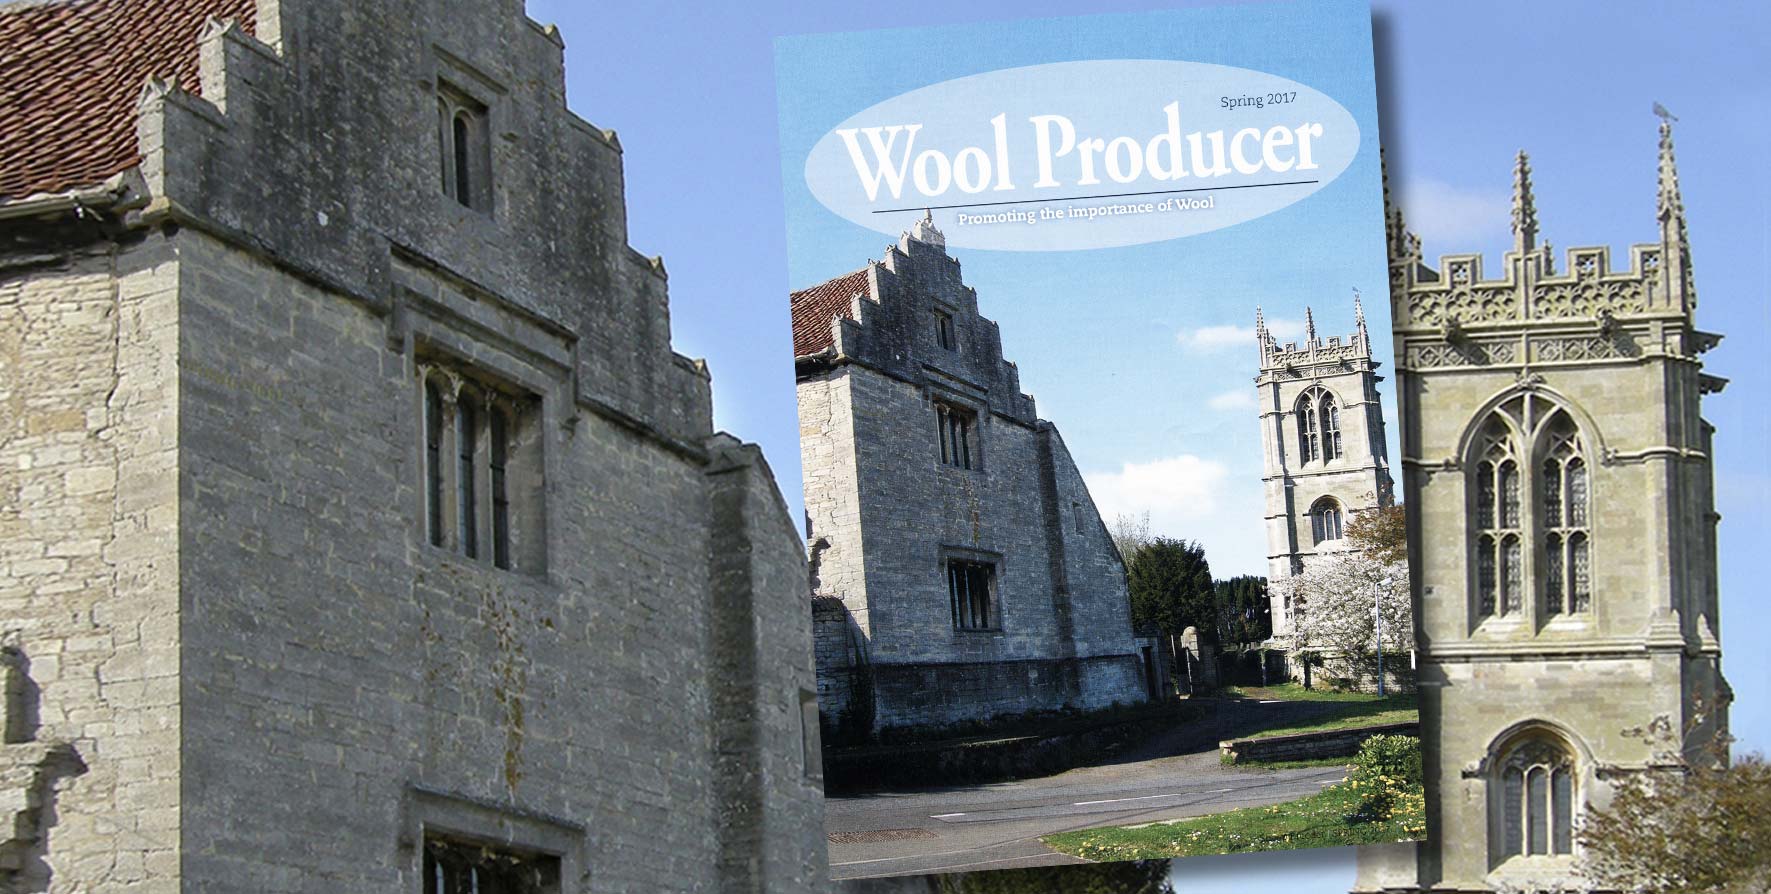 Traitors Gate - The Wool Producer